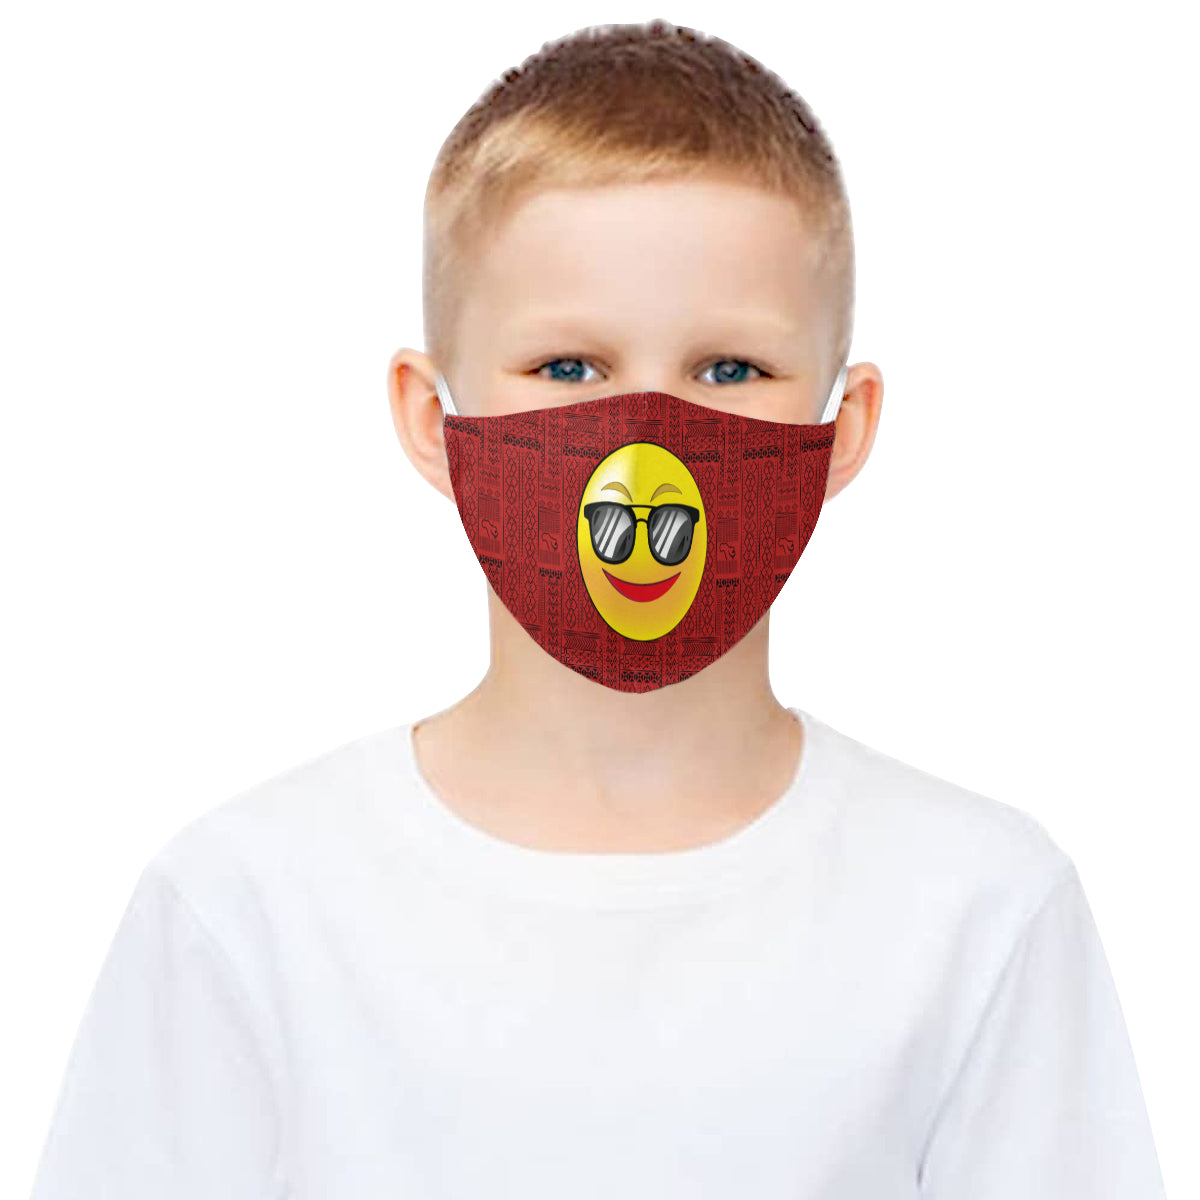 COOL Tribal Print Emoji Cotton Fabric Face Mask with Filter Slot &amp; Adjustable Strap - Non-medical use (2 Filters Included)